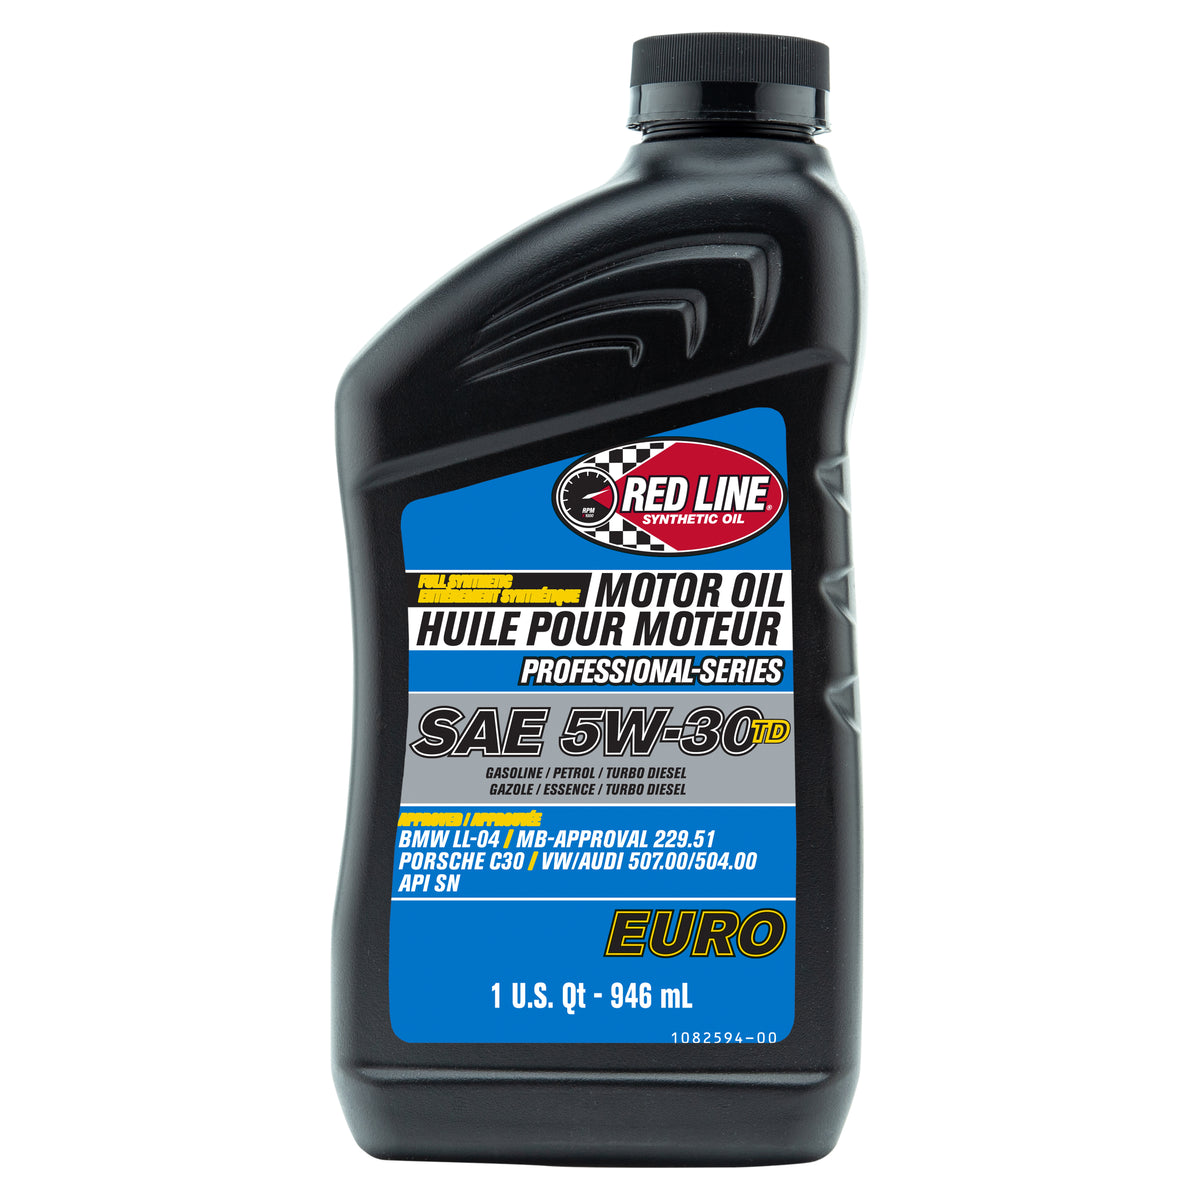 Red Line Synthetic Oil